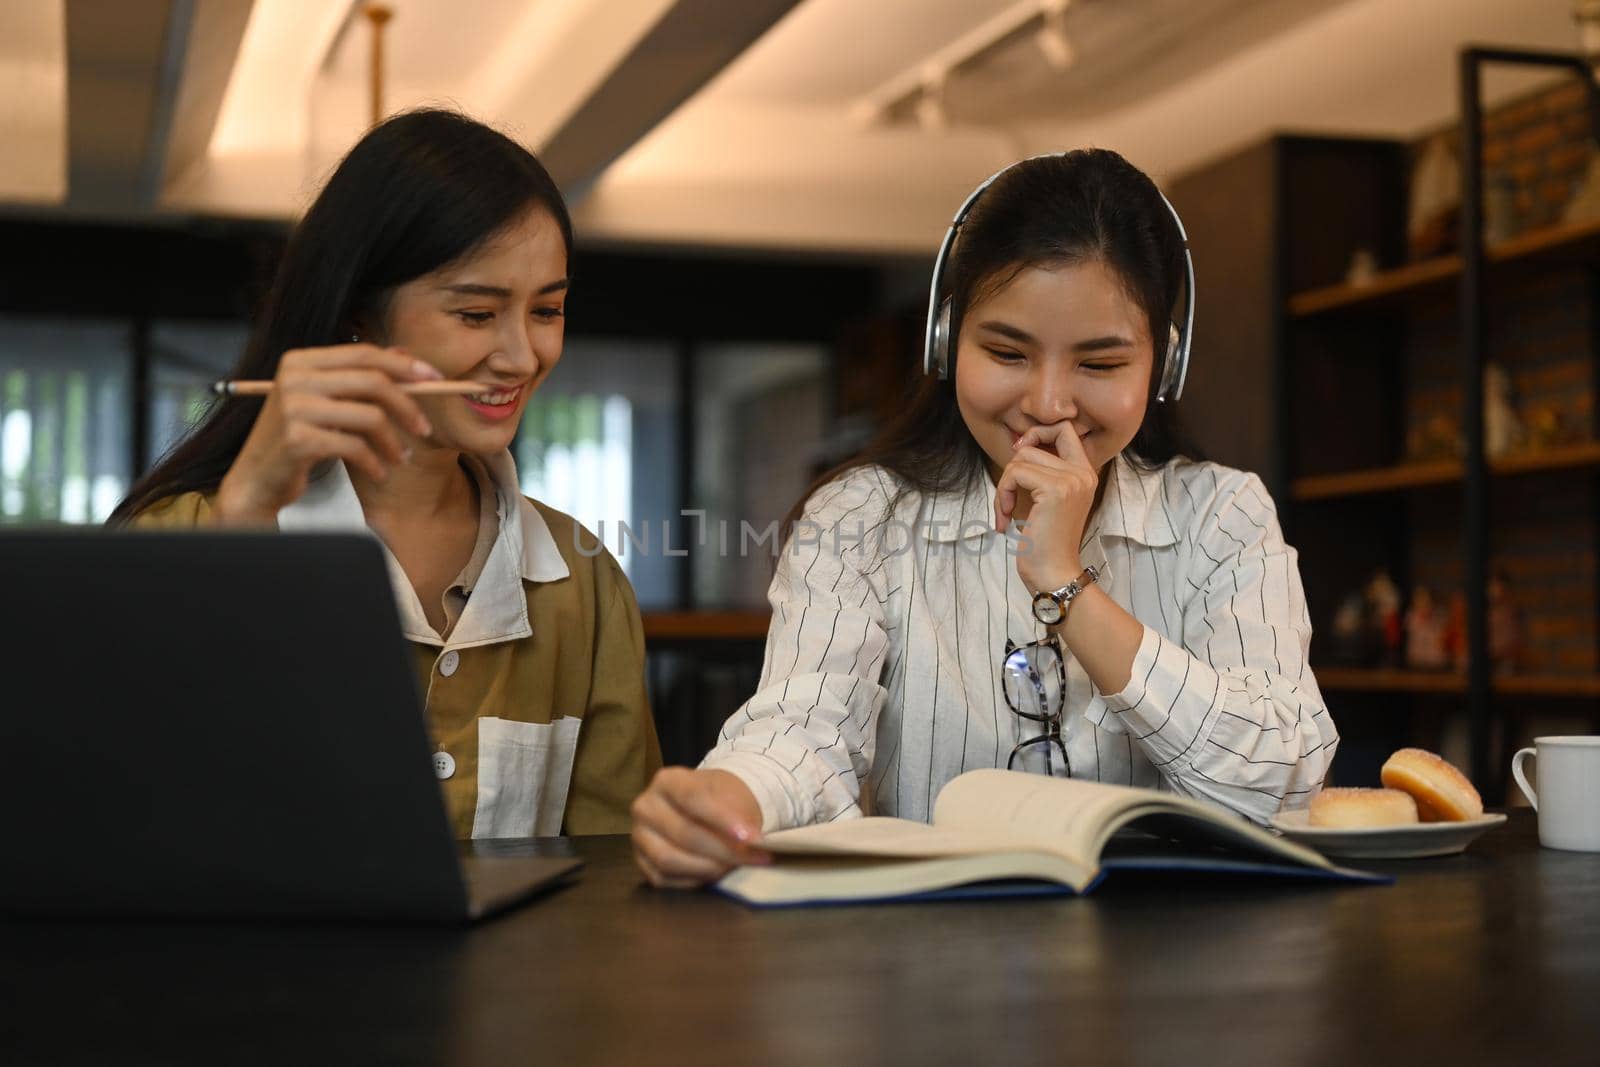 Two cheerful young students reading book while preparing for exams in college library. Education, people and technology concept.